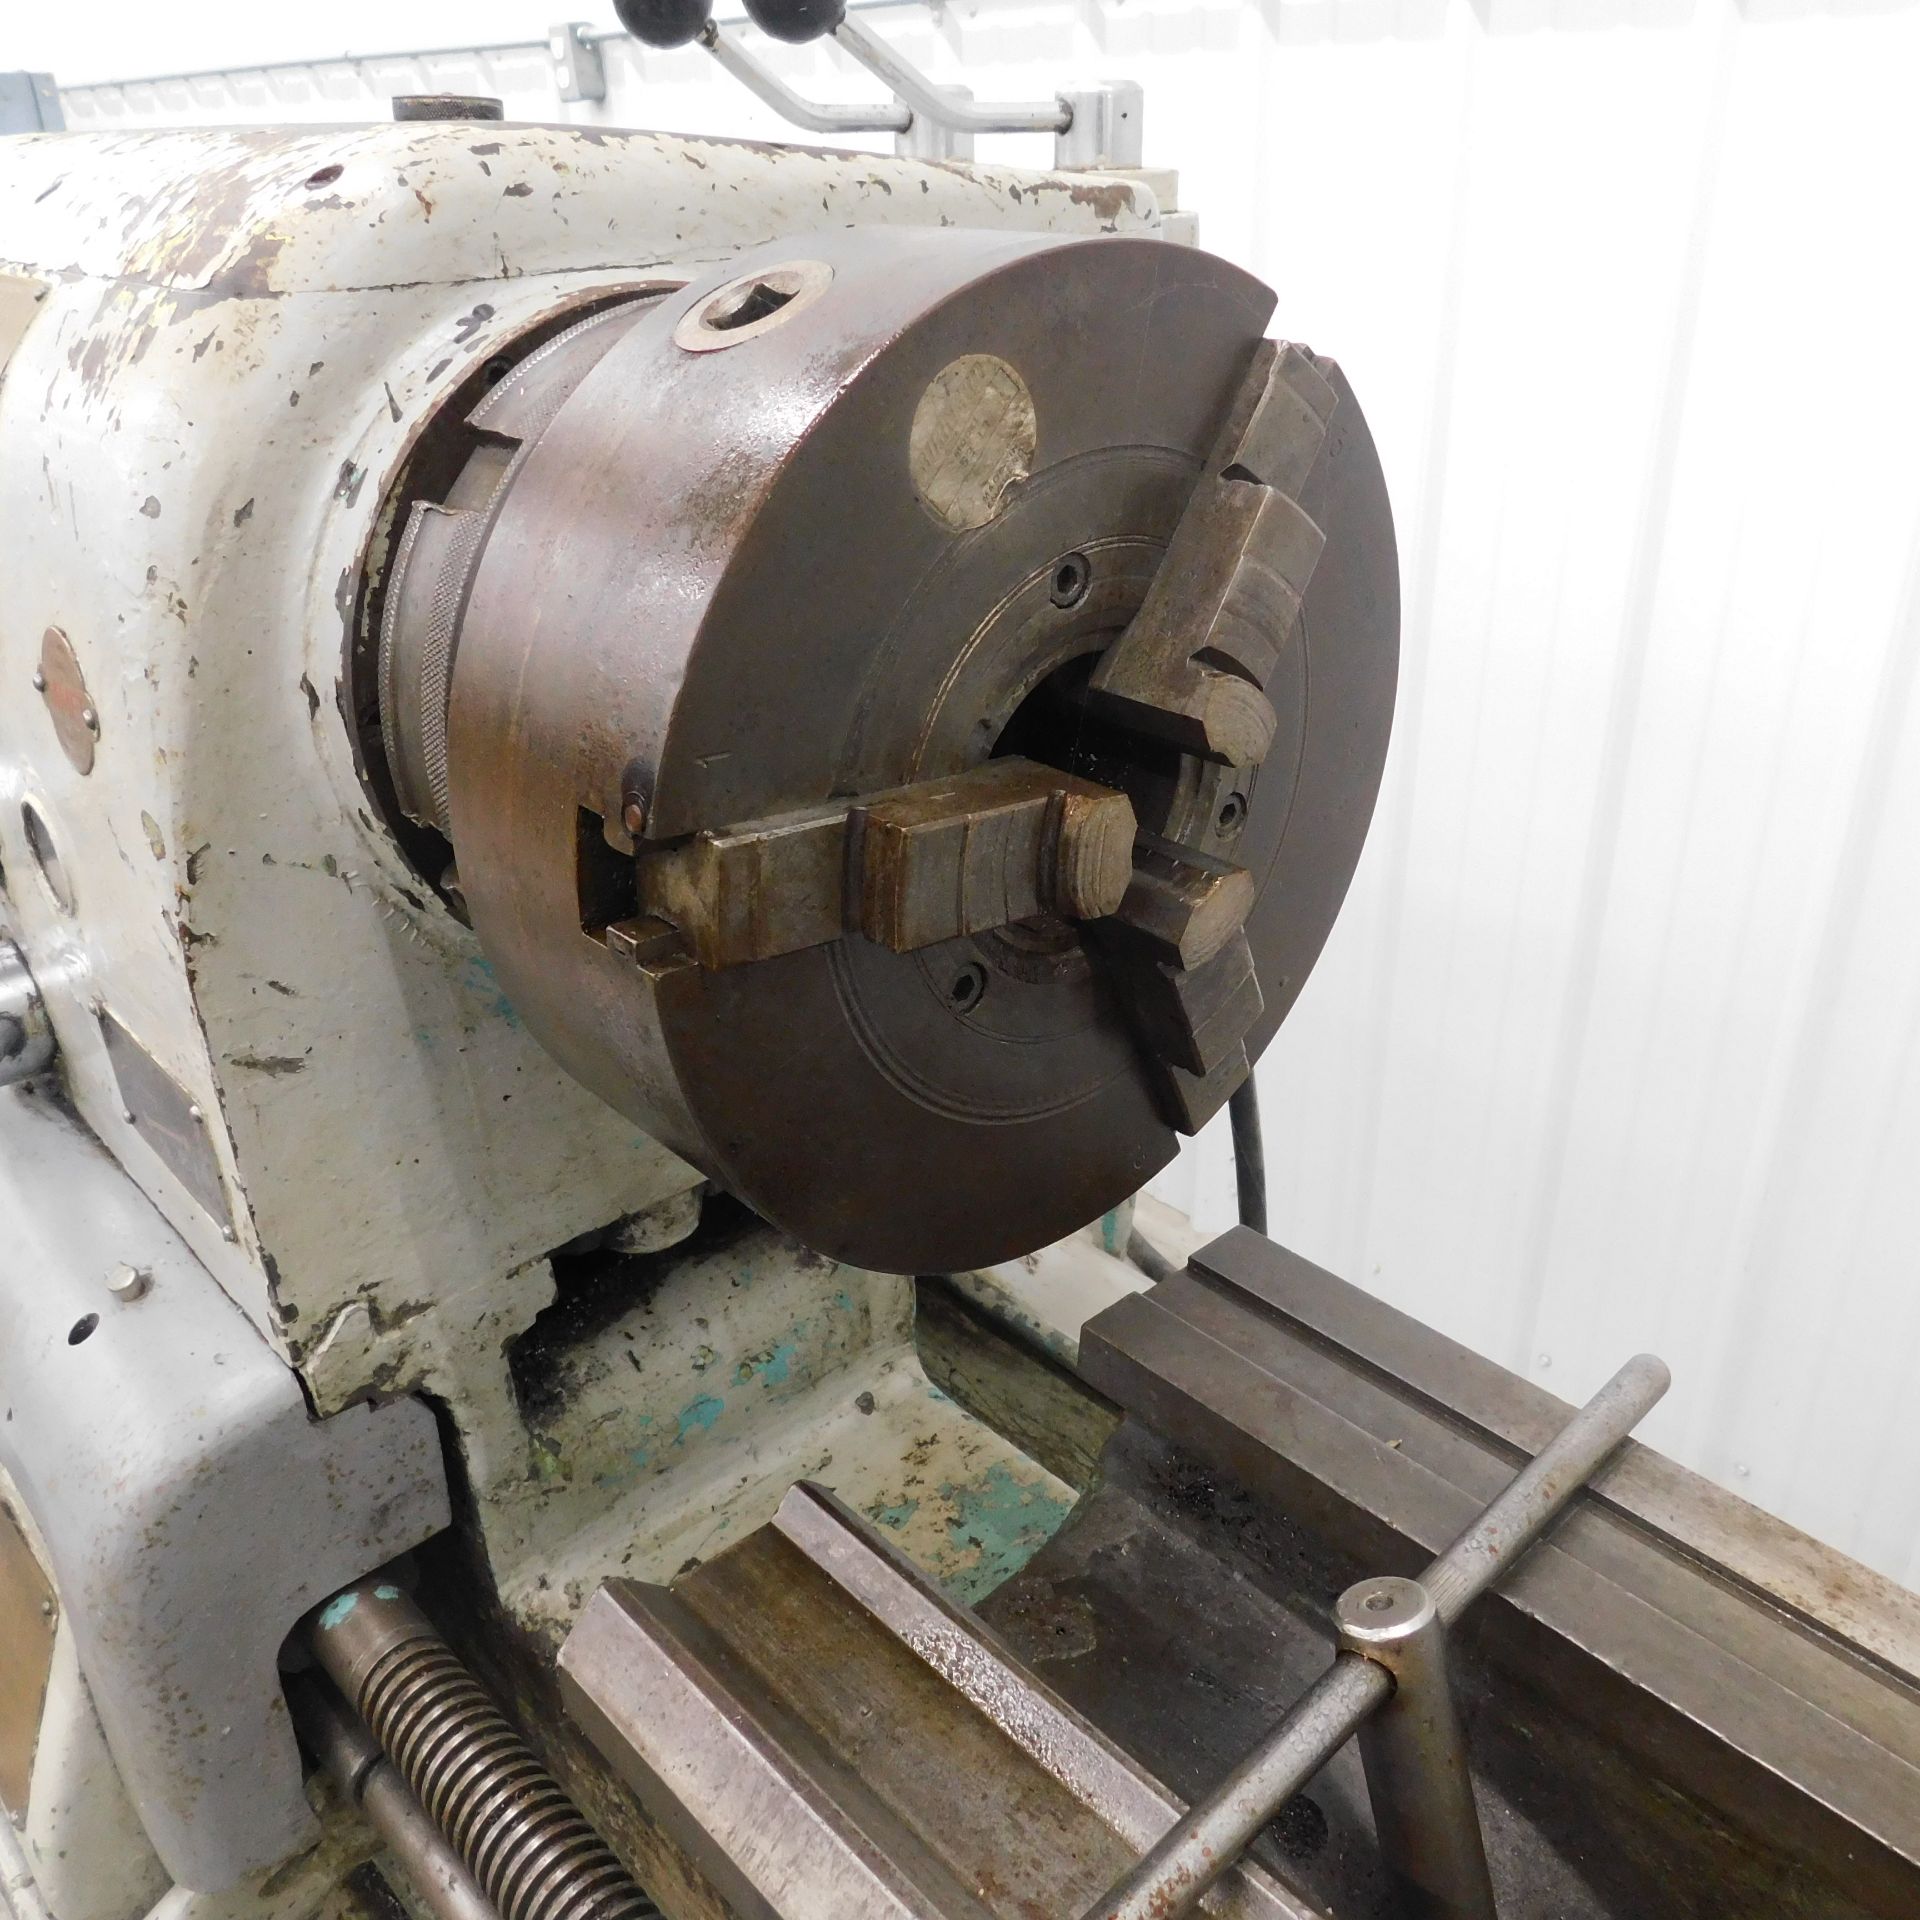 Clausing Colchester 15" X 48" Engine Lathe, s/n 4/46419, 8" 3-Jaw Chuck - Image 4 of 5